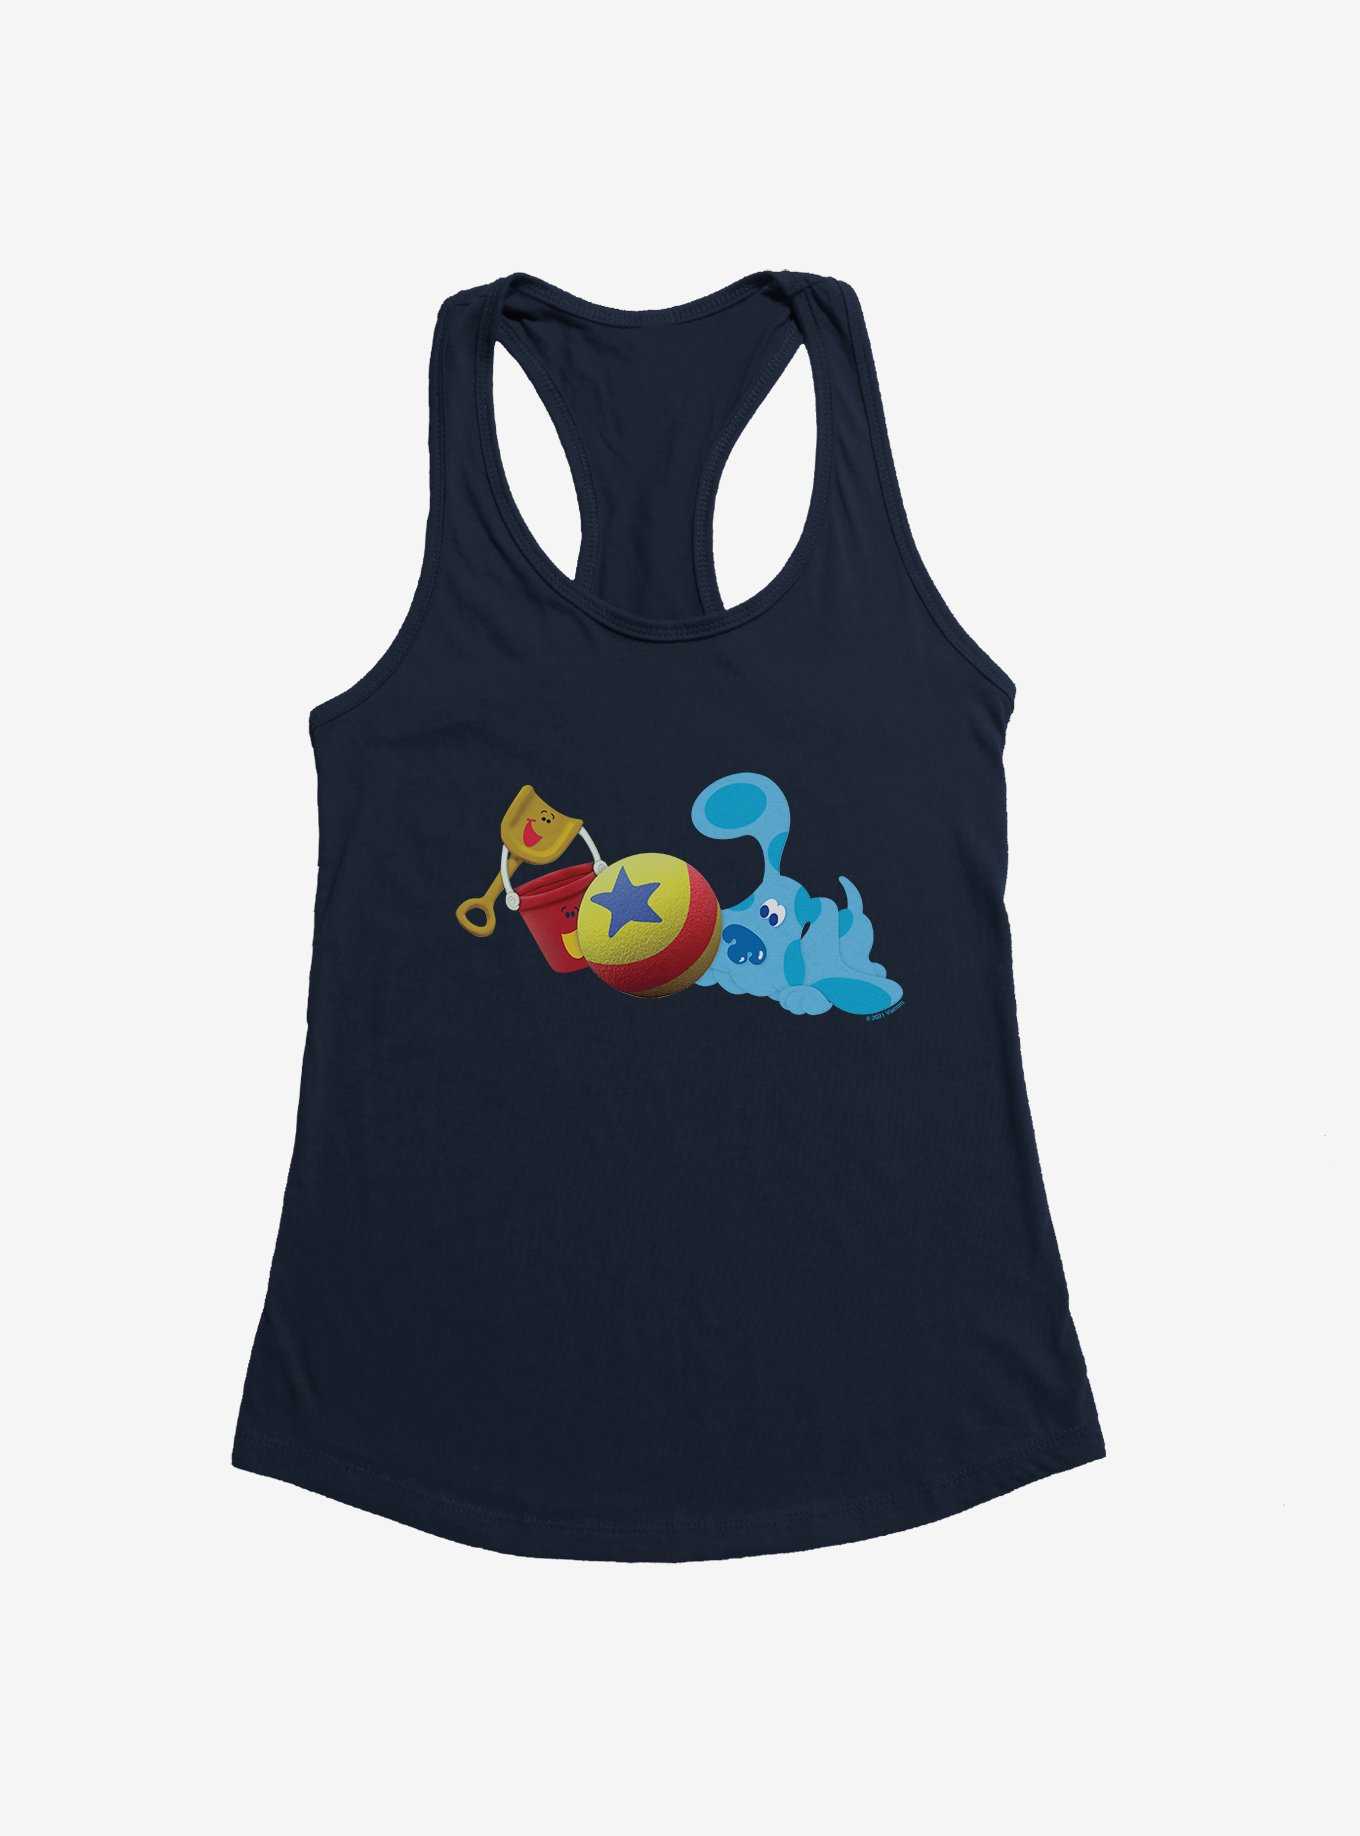 Blue's Clues Shovel And Pail Playtime Girls Tank, , hi-res